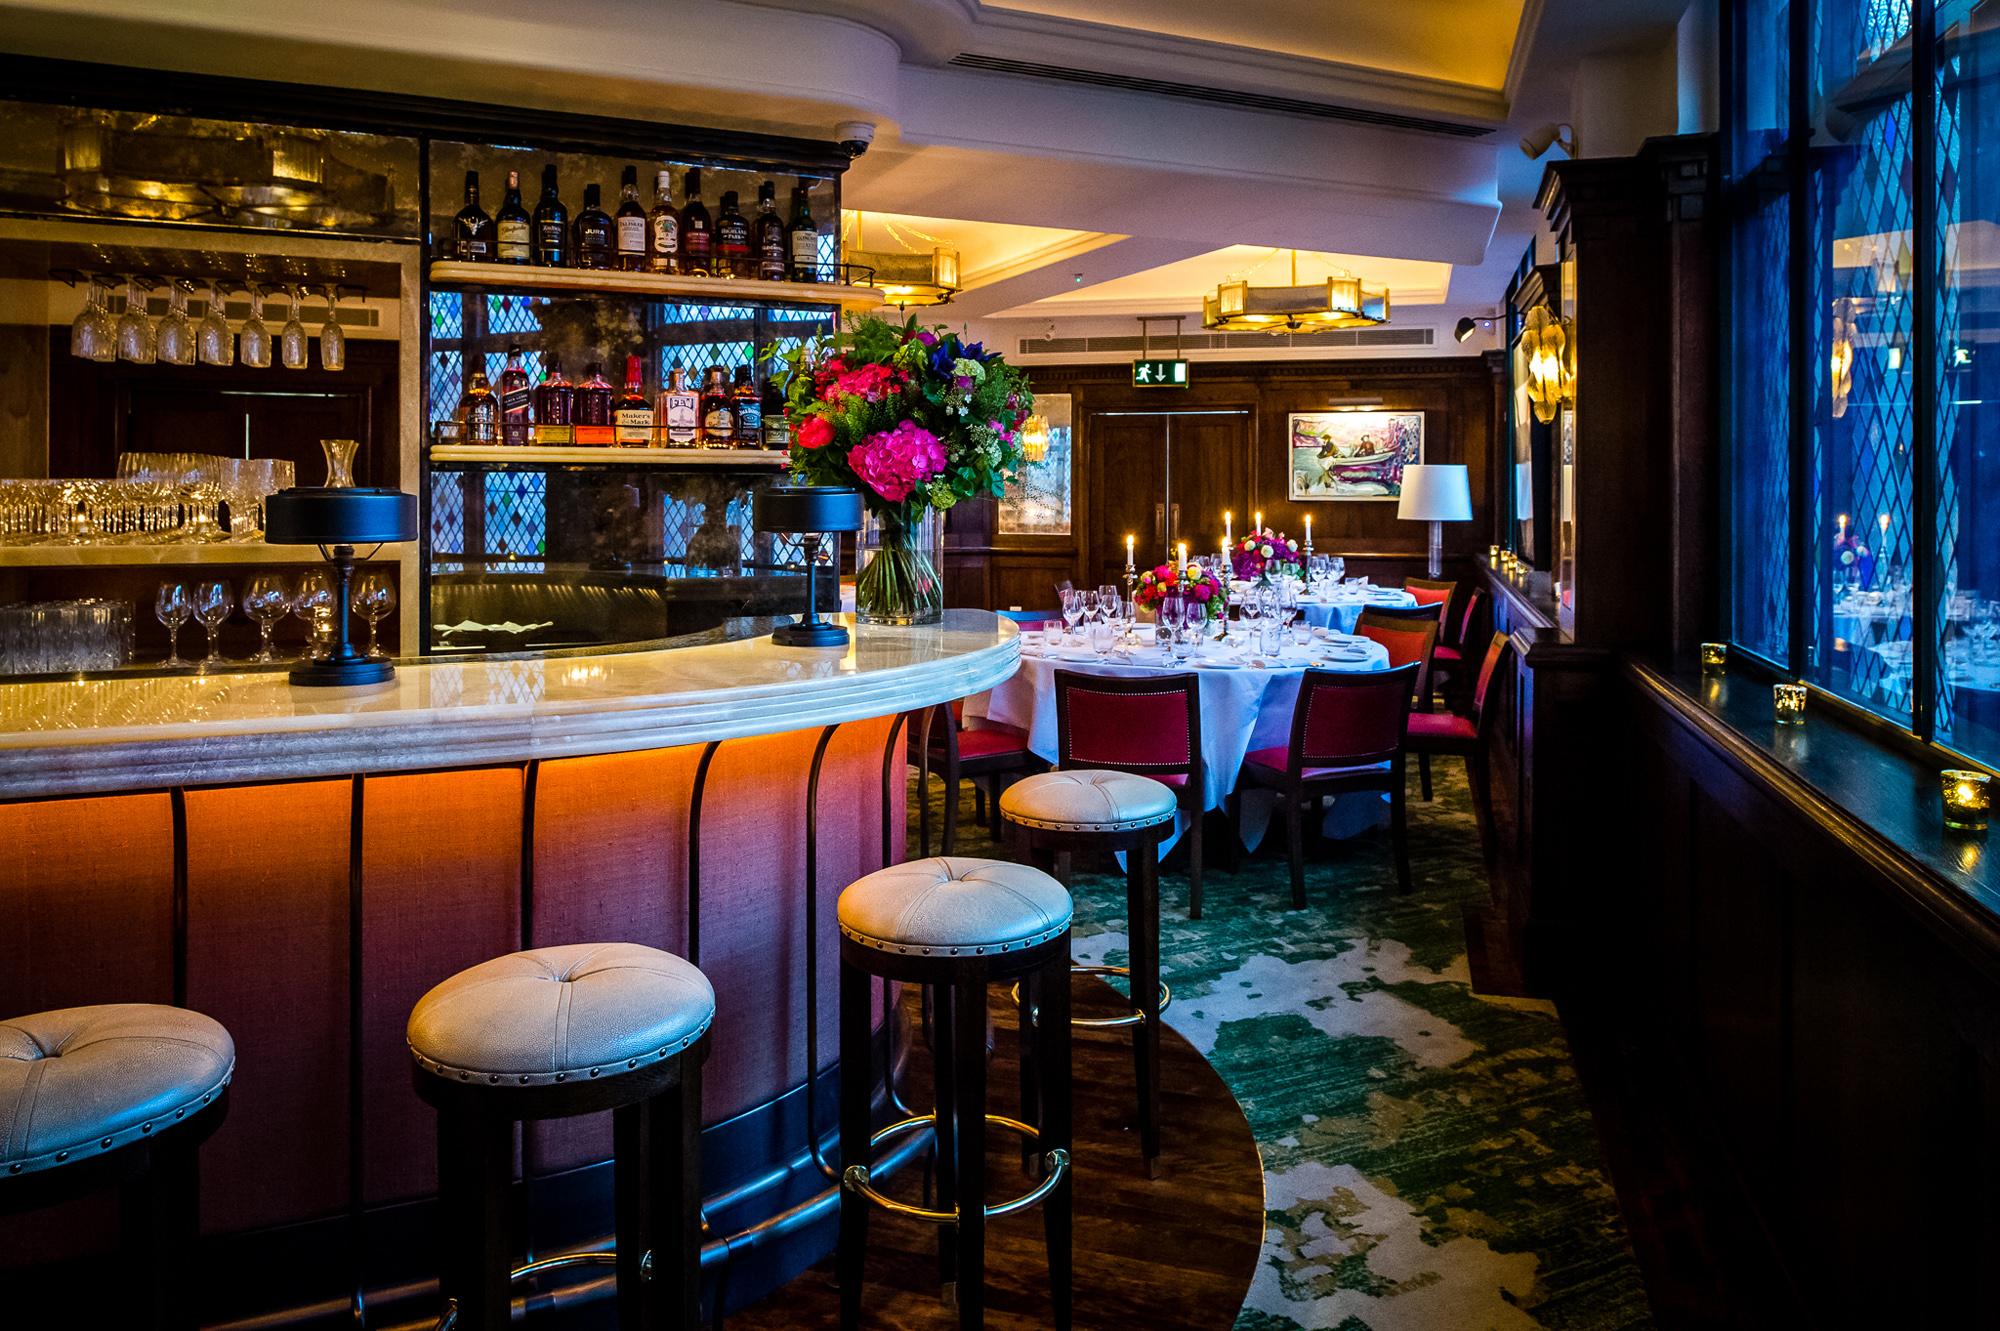 The Ivy – Private Room, Exclusive Use photo #1